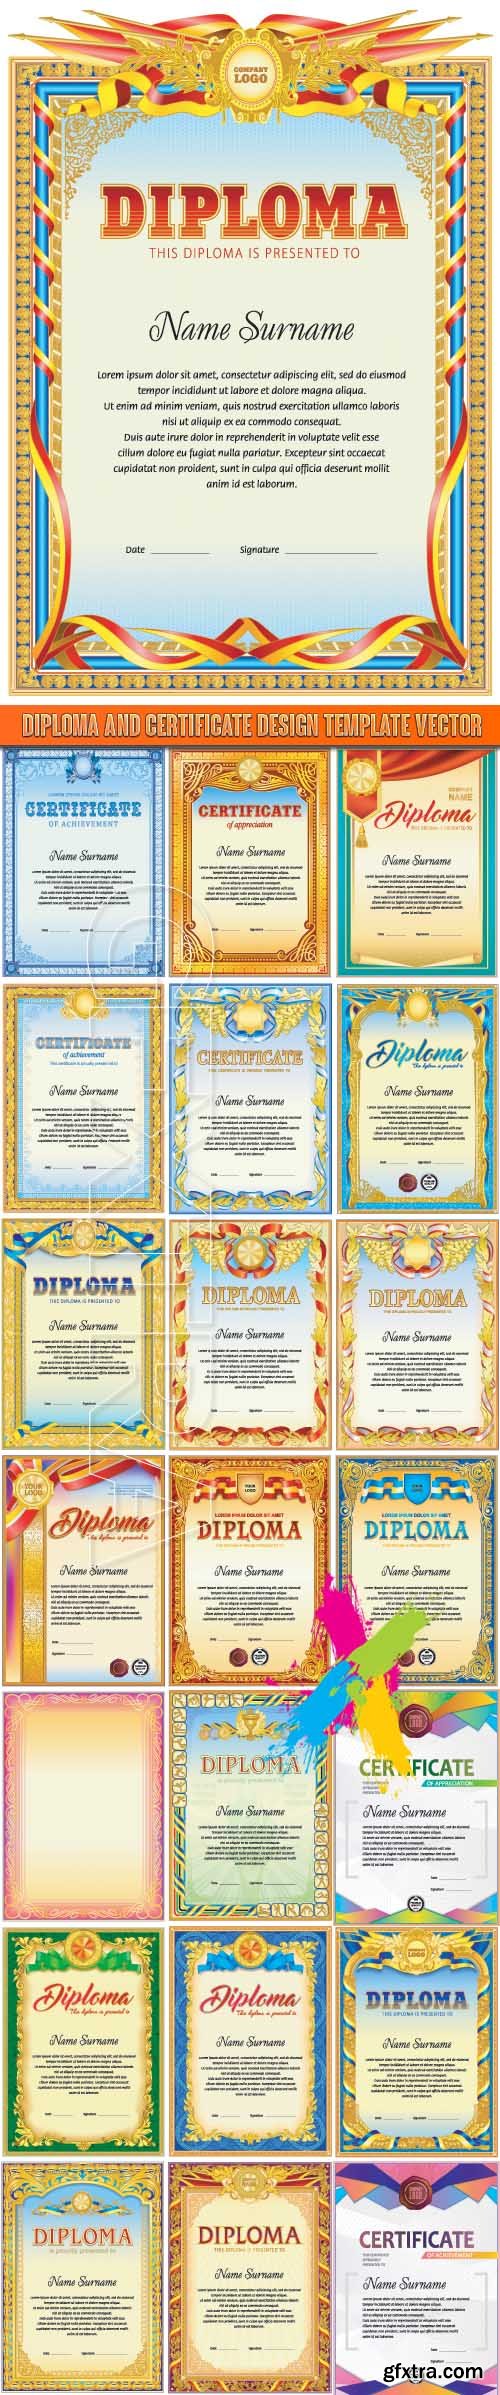 Diploma and certificate design template vector